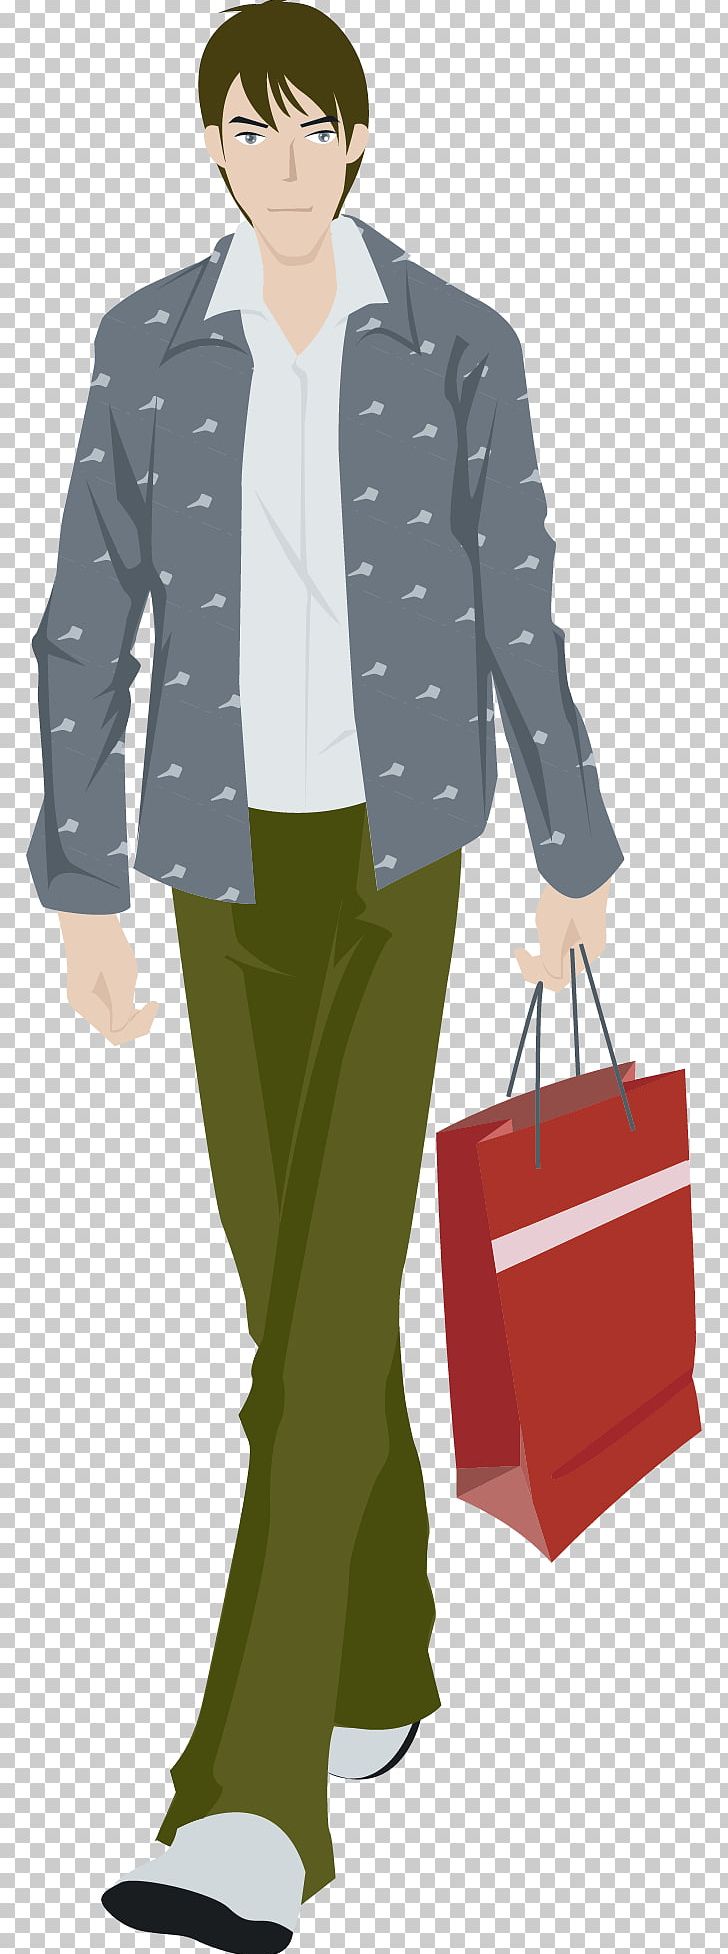 Cartoon Man Illustration PNG, Clipart, Angry Man, Animation, Artworks, Business Man, Commerce Free PNG Download